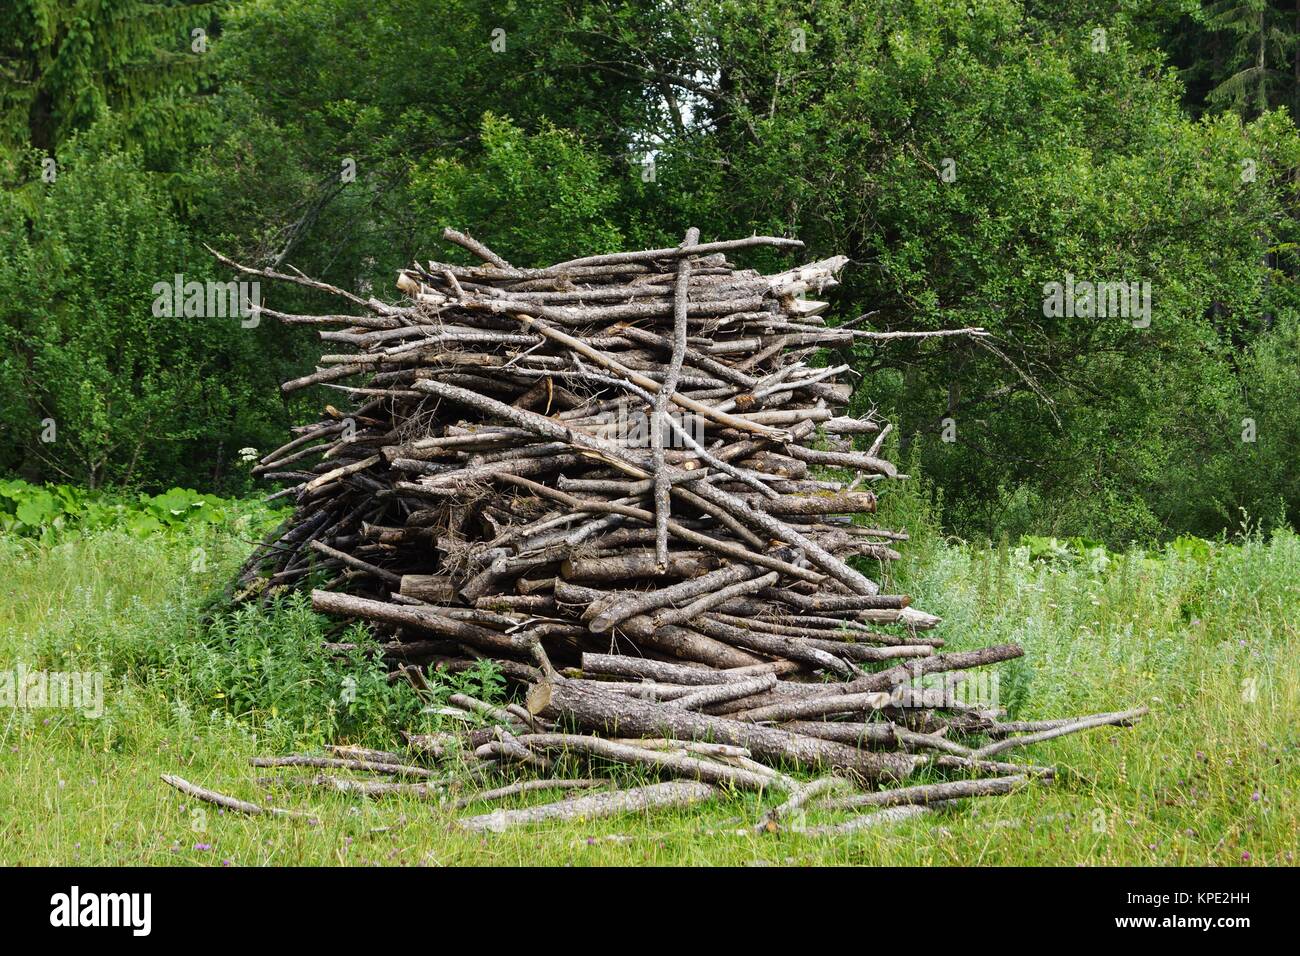 a pile of cut branches lying on a meadow Stock Photo